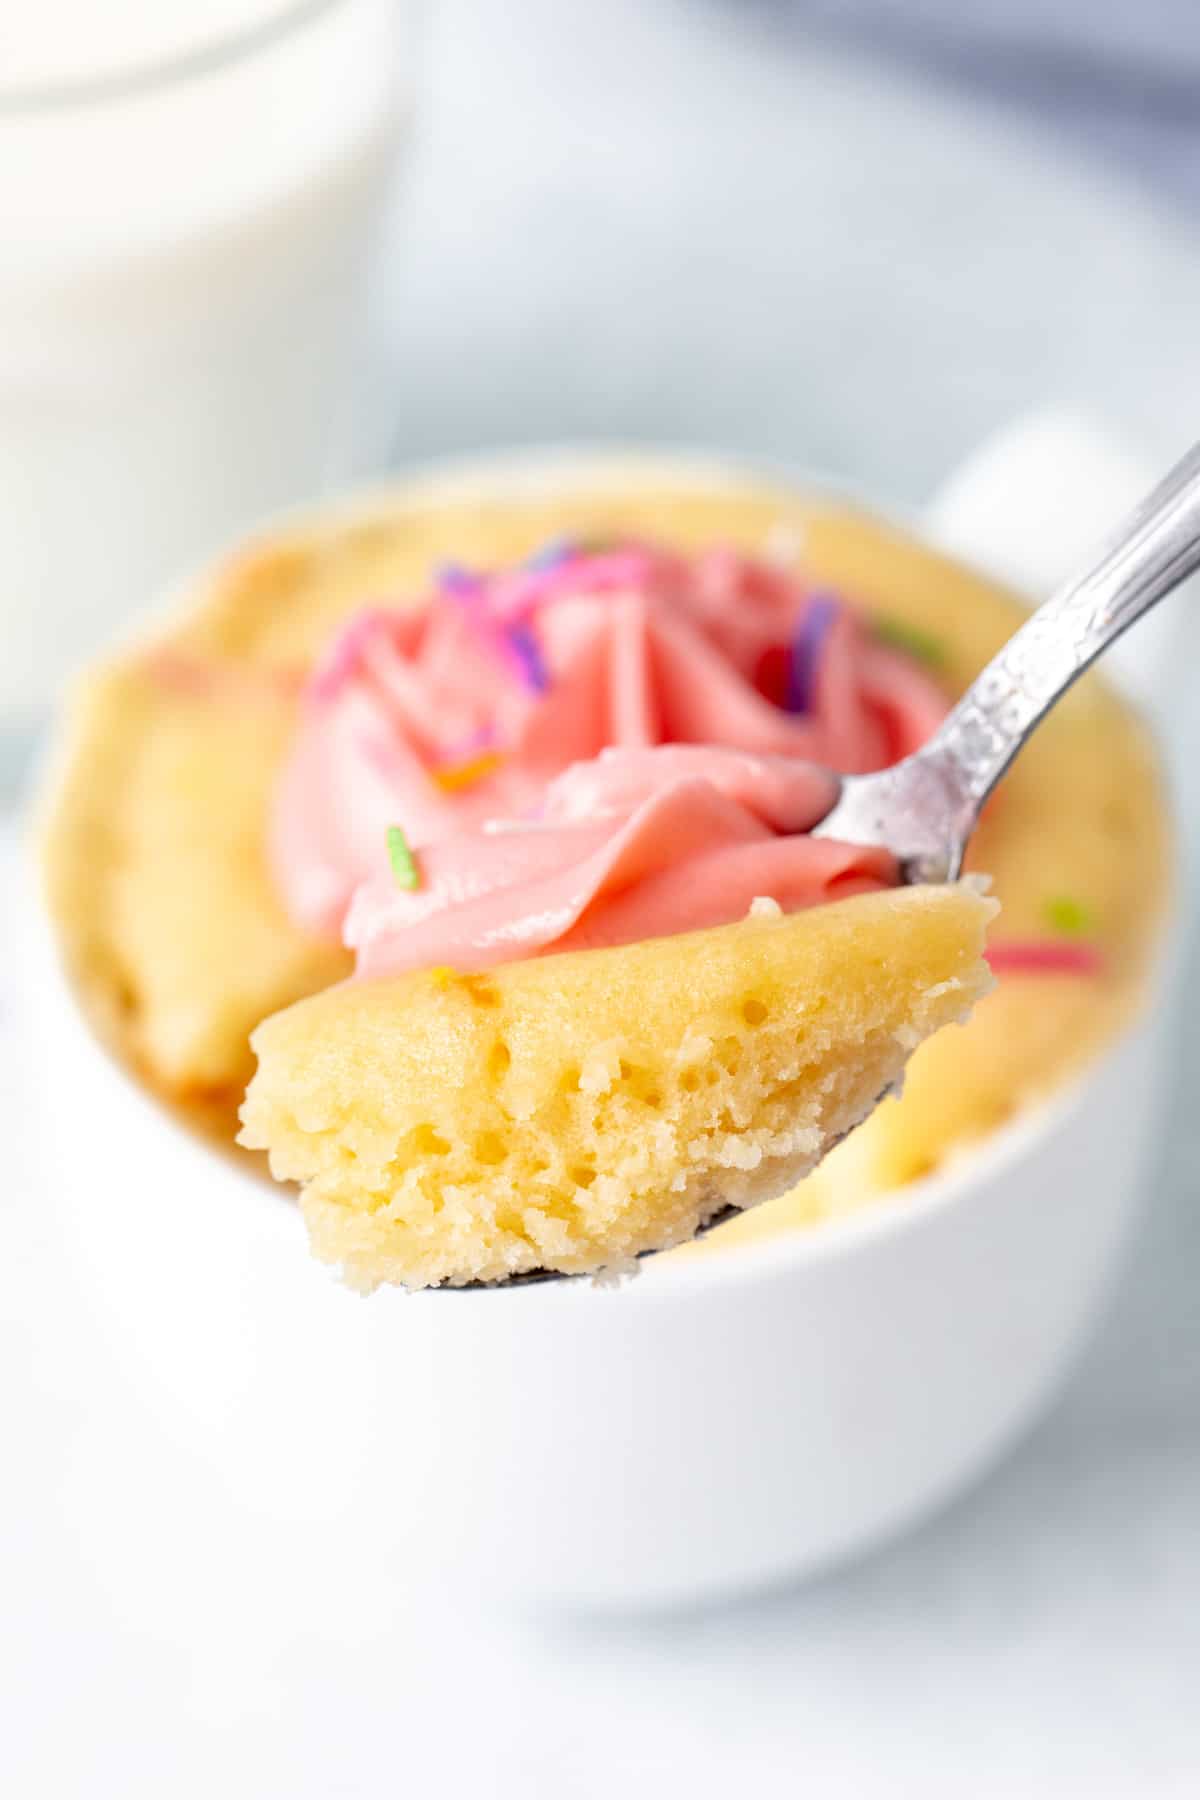 Spoon with a scoop of vanilla cake made in a mug